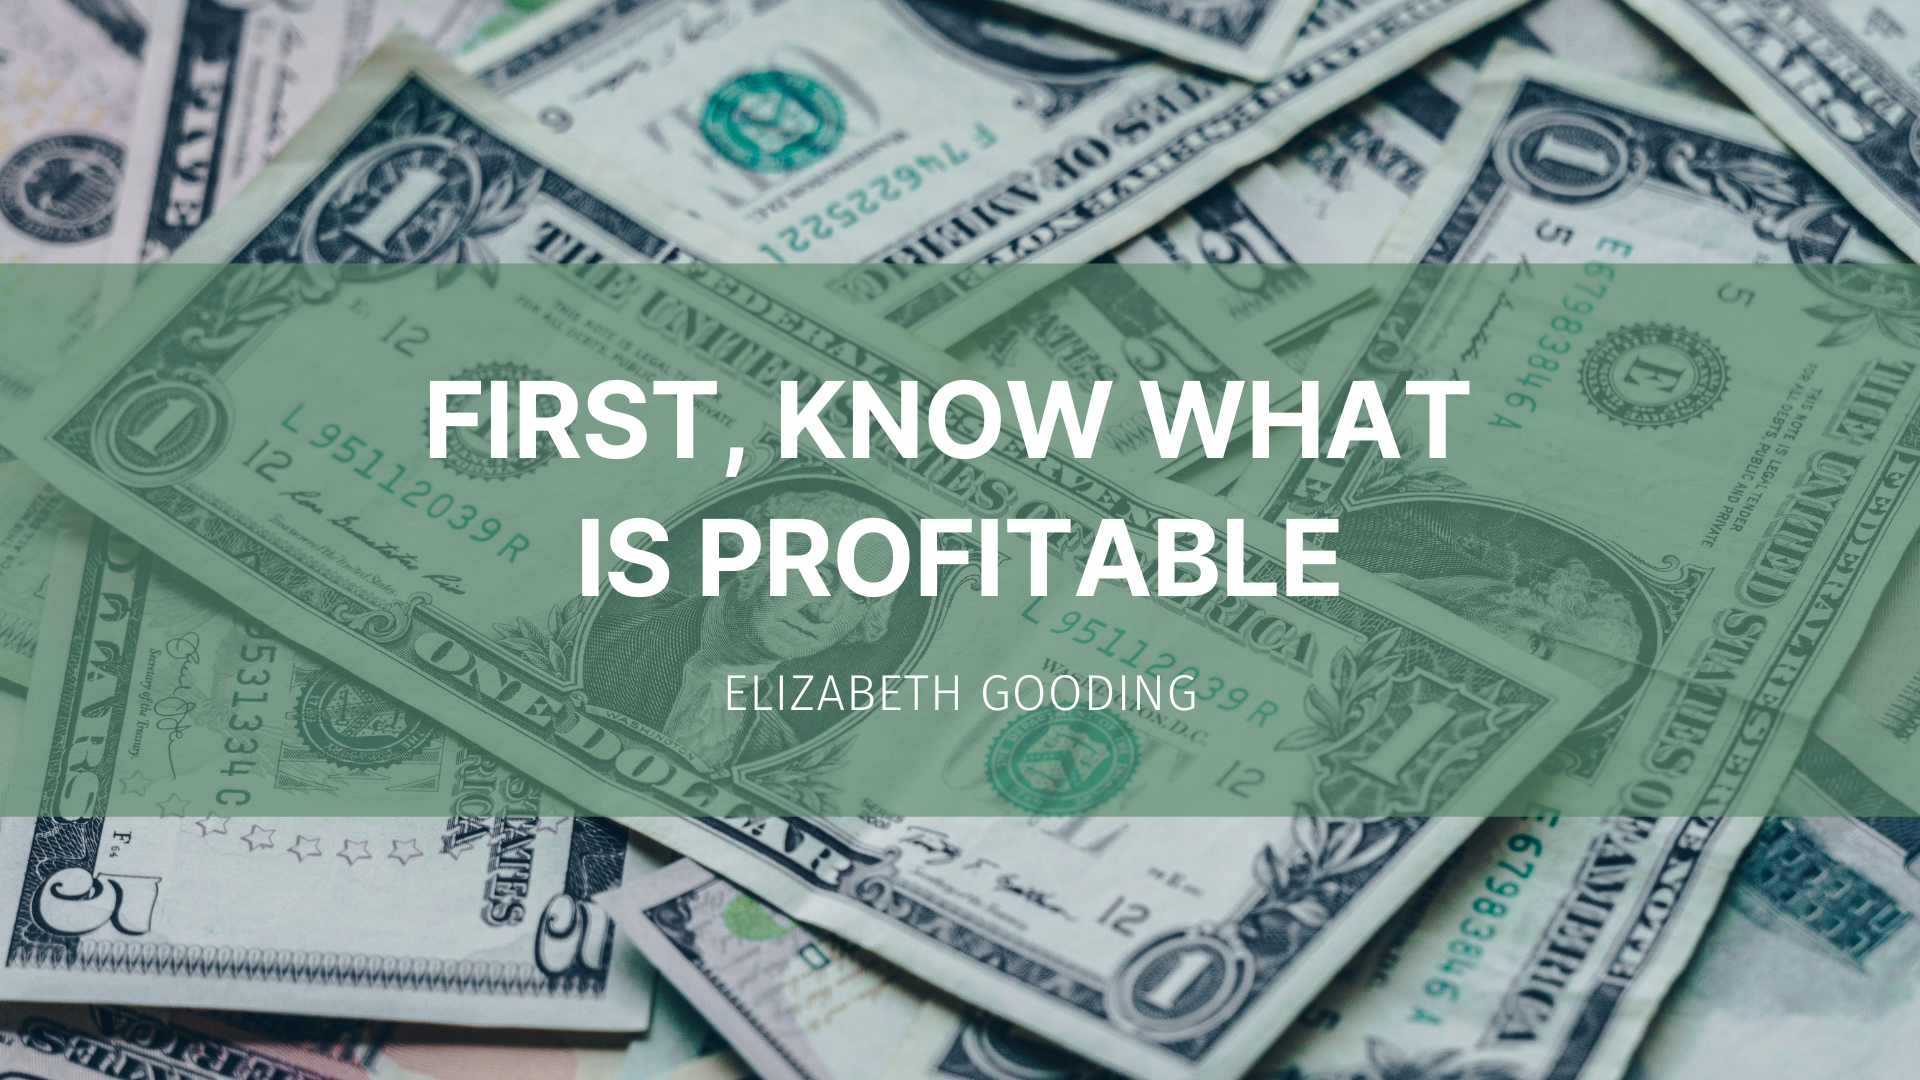 Featured image for “First, know what is profitable”